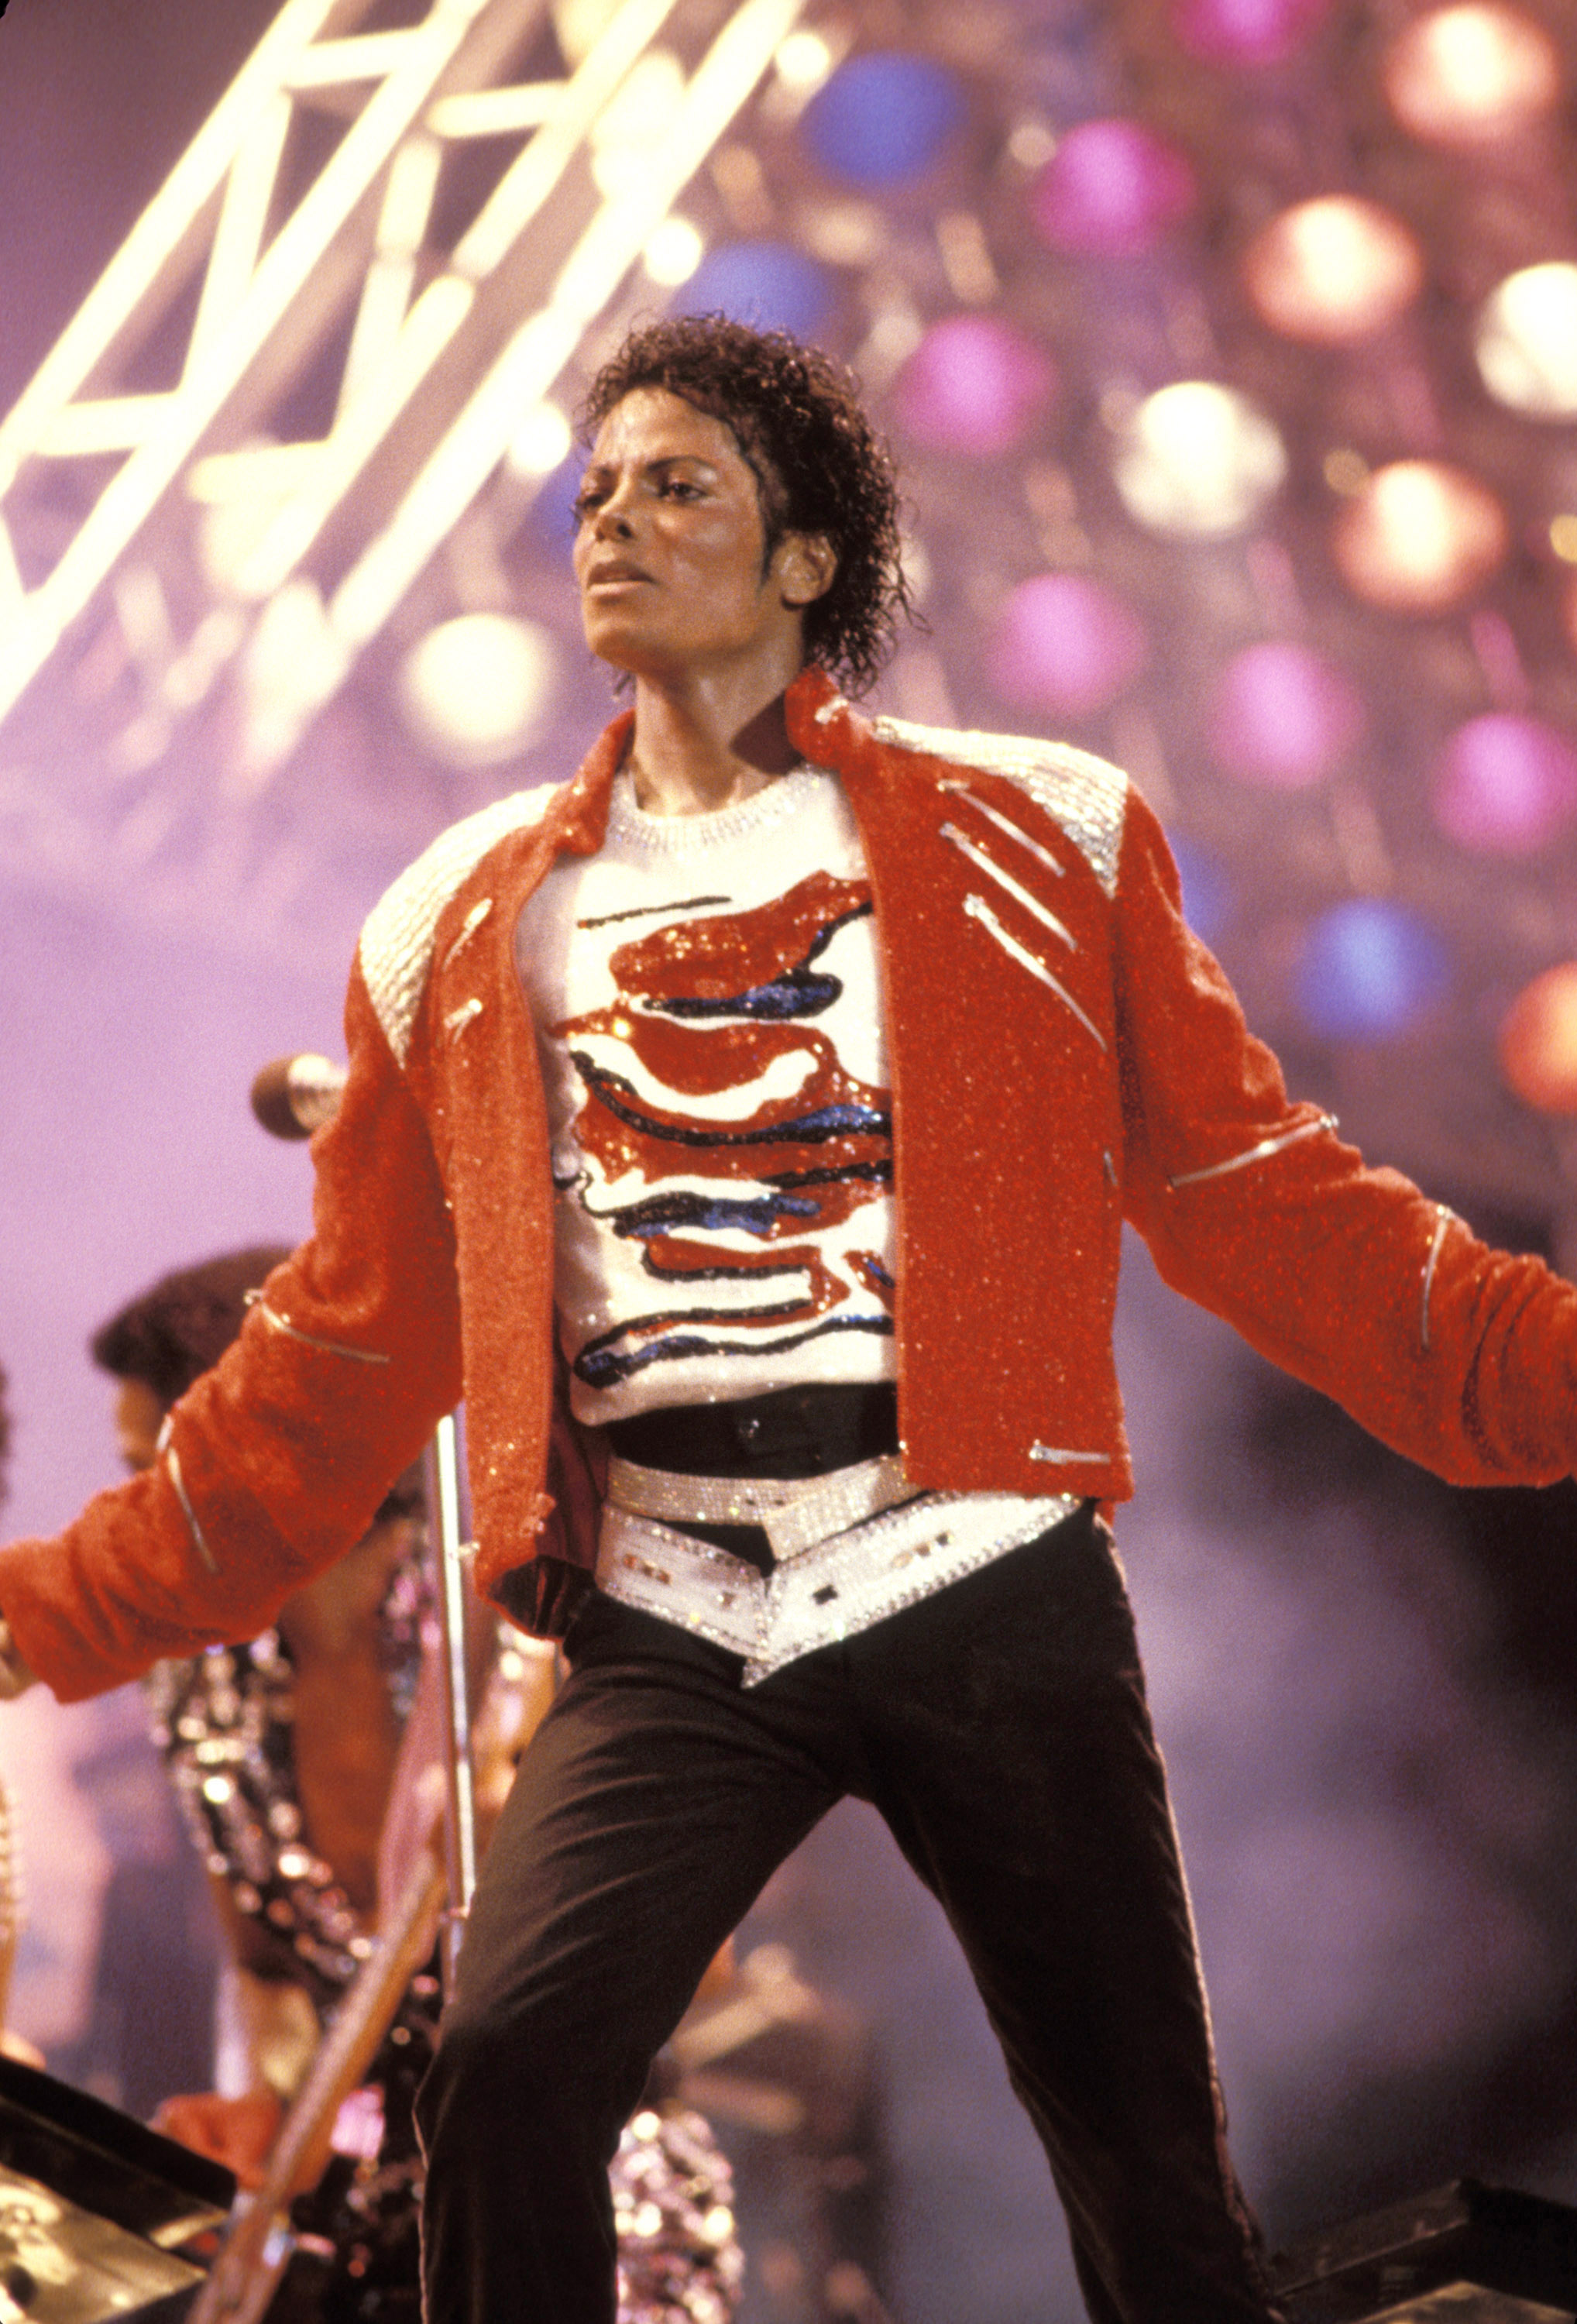 Michael Jackson Thriller Live Wallpaper:Amazon.com:Appstore for Android